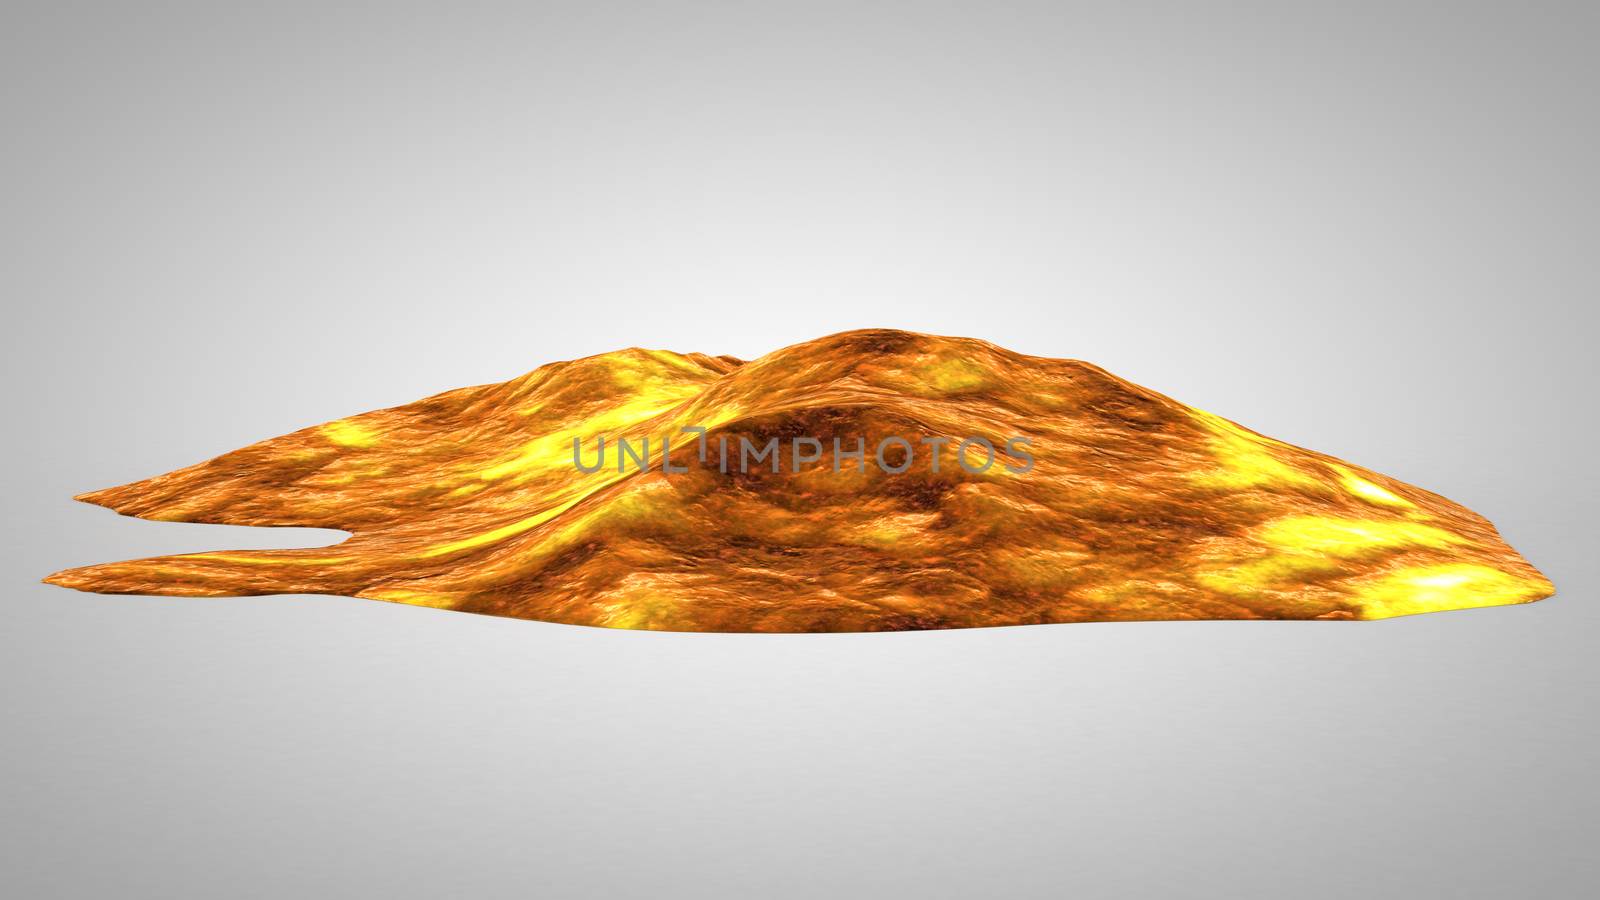 slowly cooled lava lies on white background